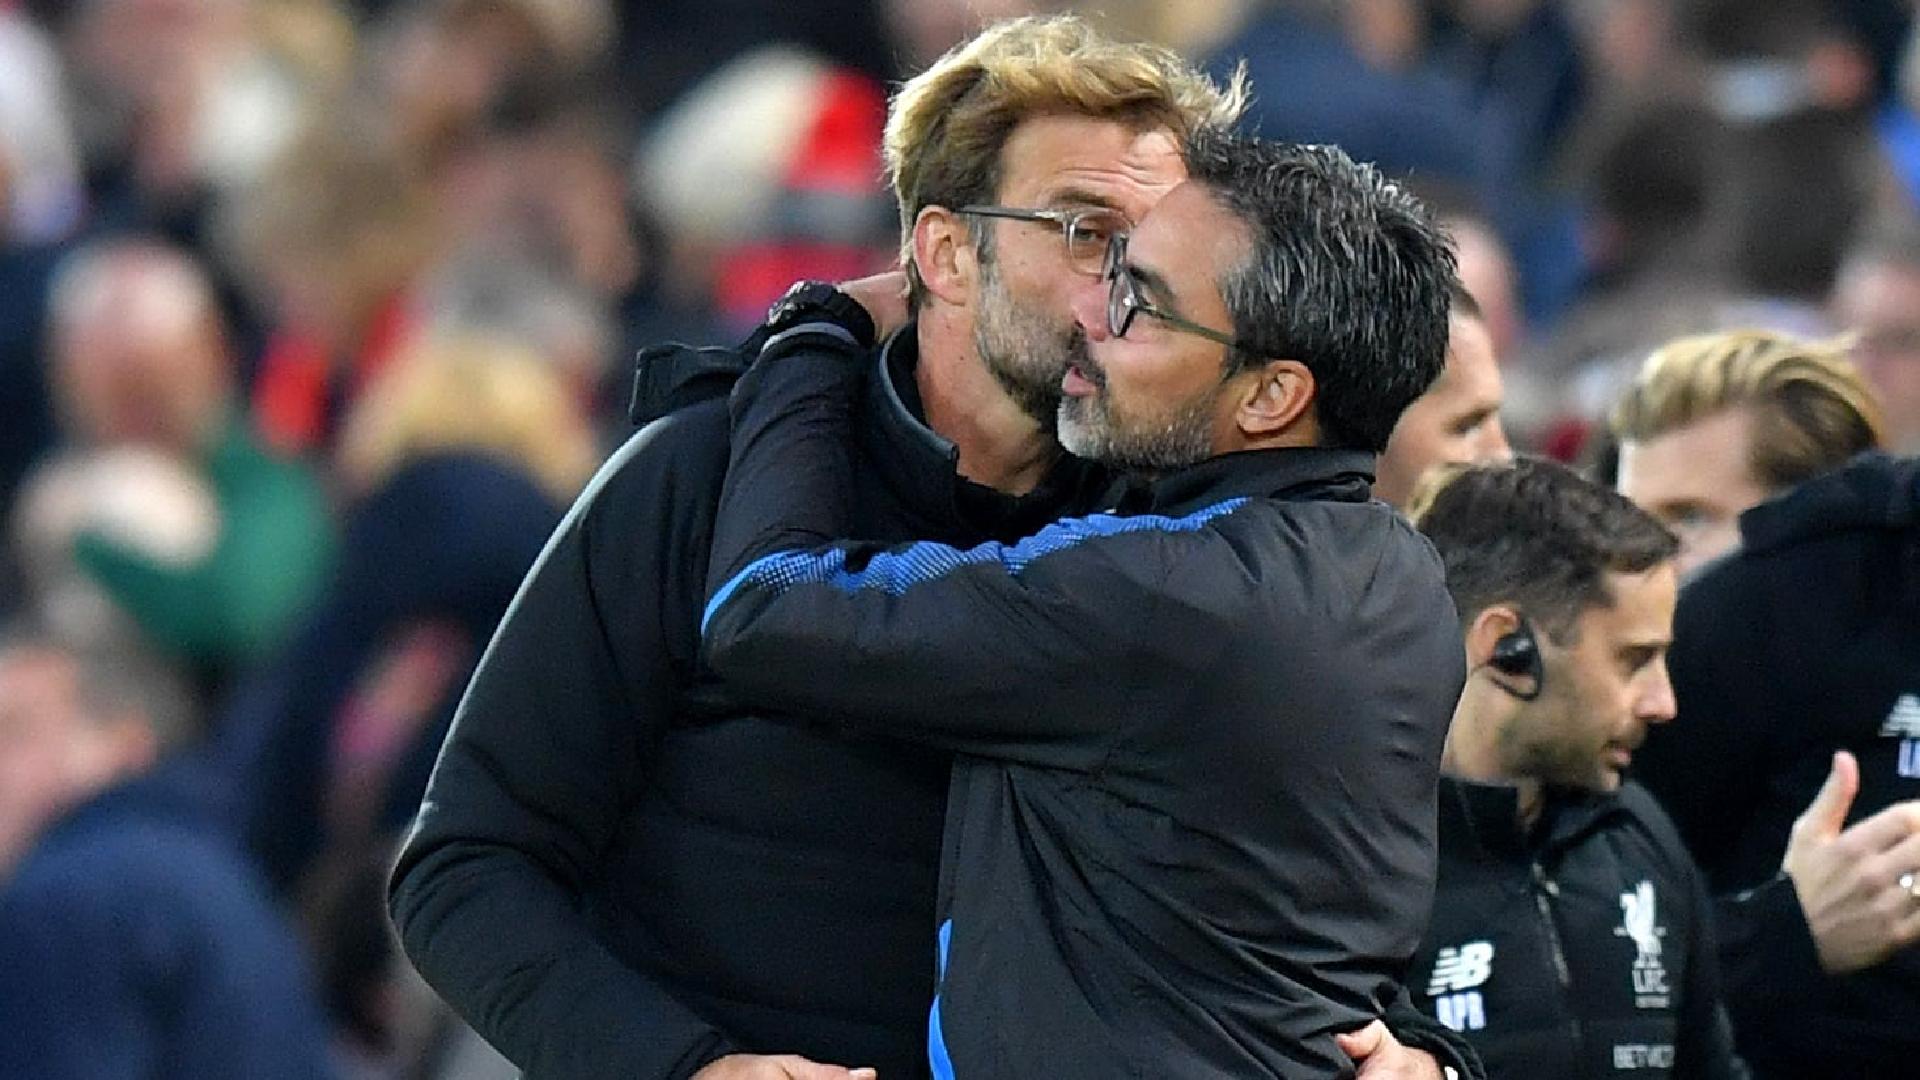 Tips for watching Klopp's final match at Anfield. - Looking Ahead